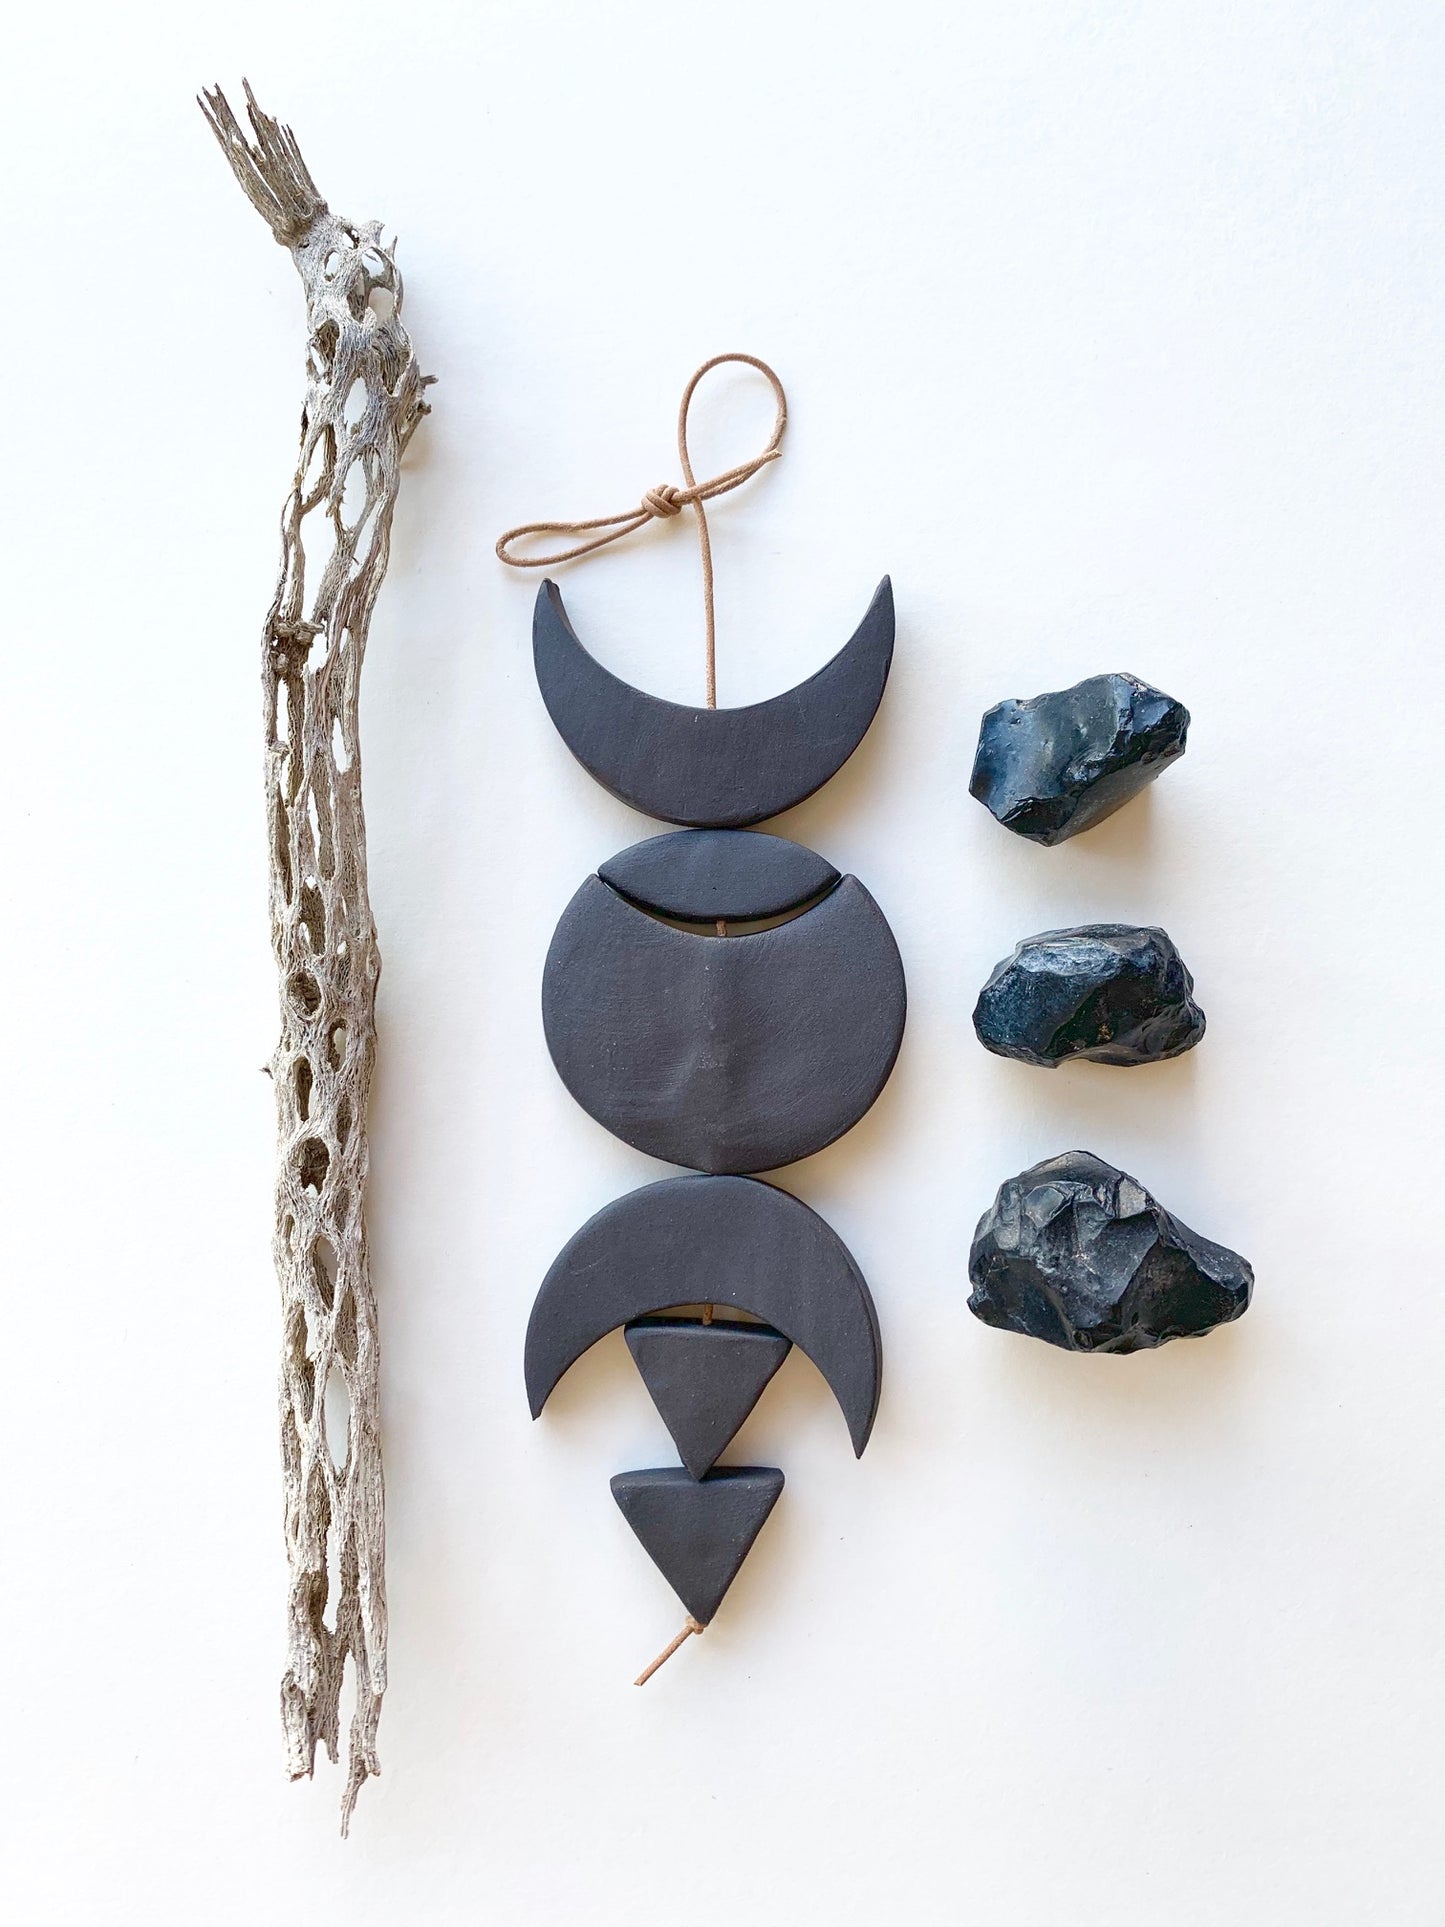 sold - one of a kind, black magic ceramic hanging